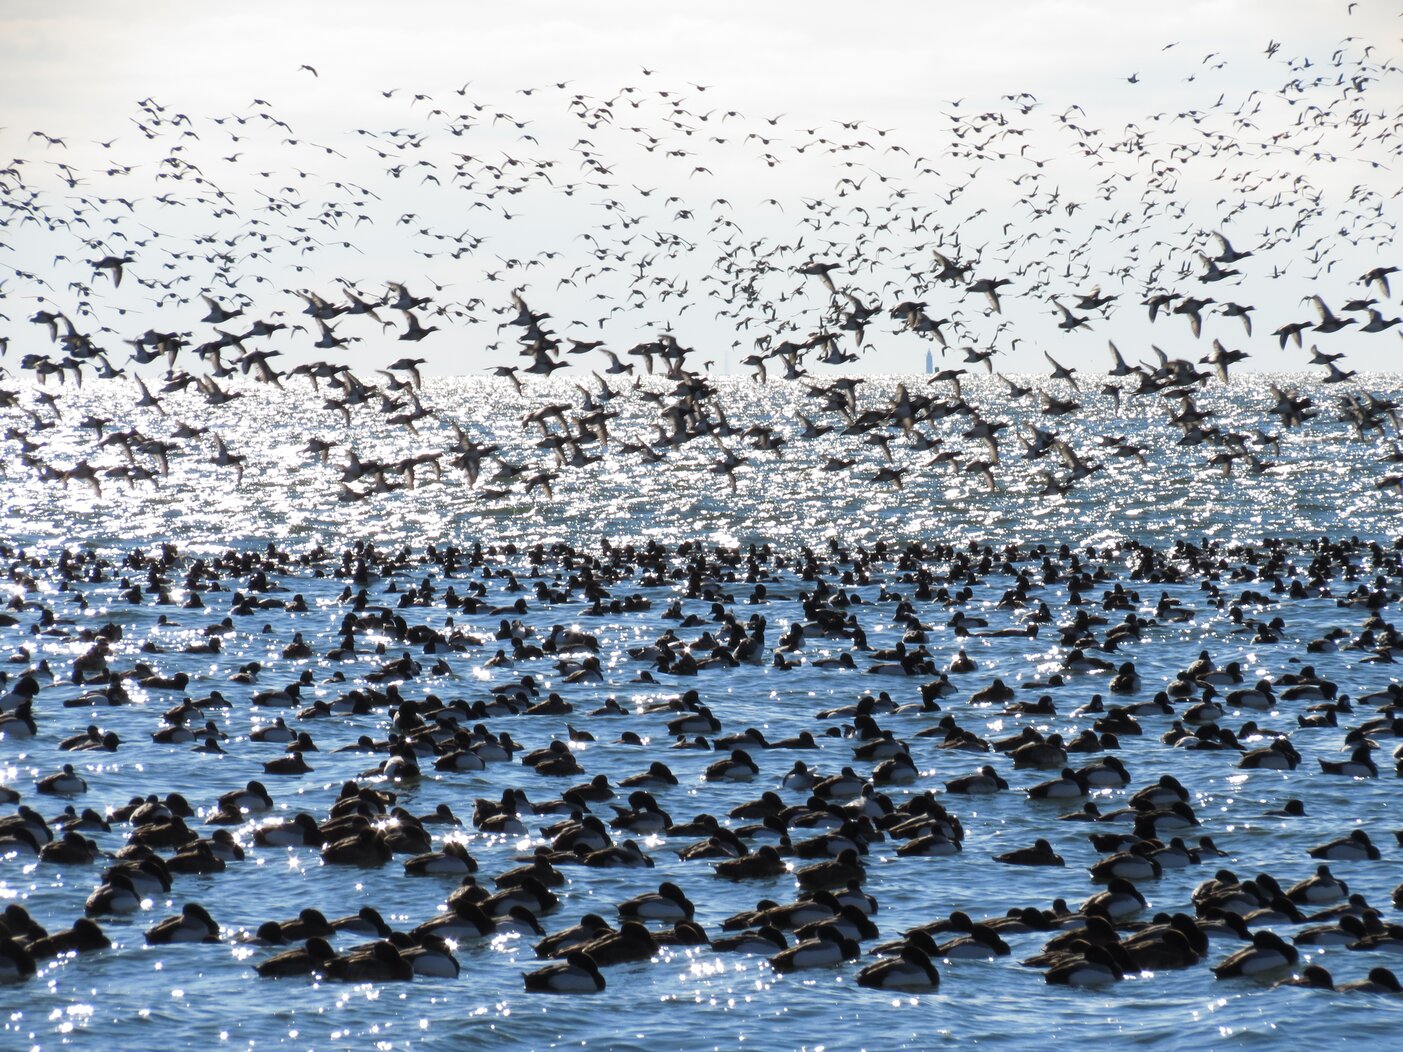 Great numbers of Greater Scaup sometimes gather in Dead Horse Bay. Photo: Keith Michael